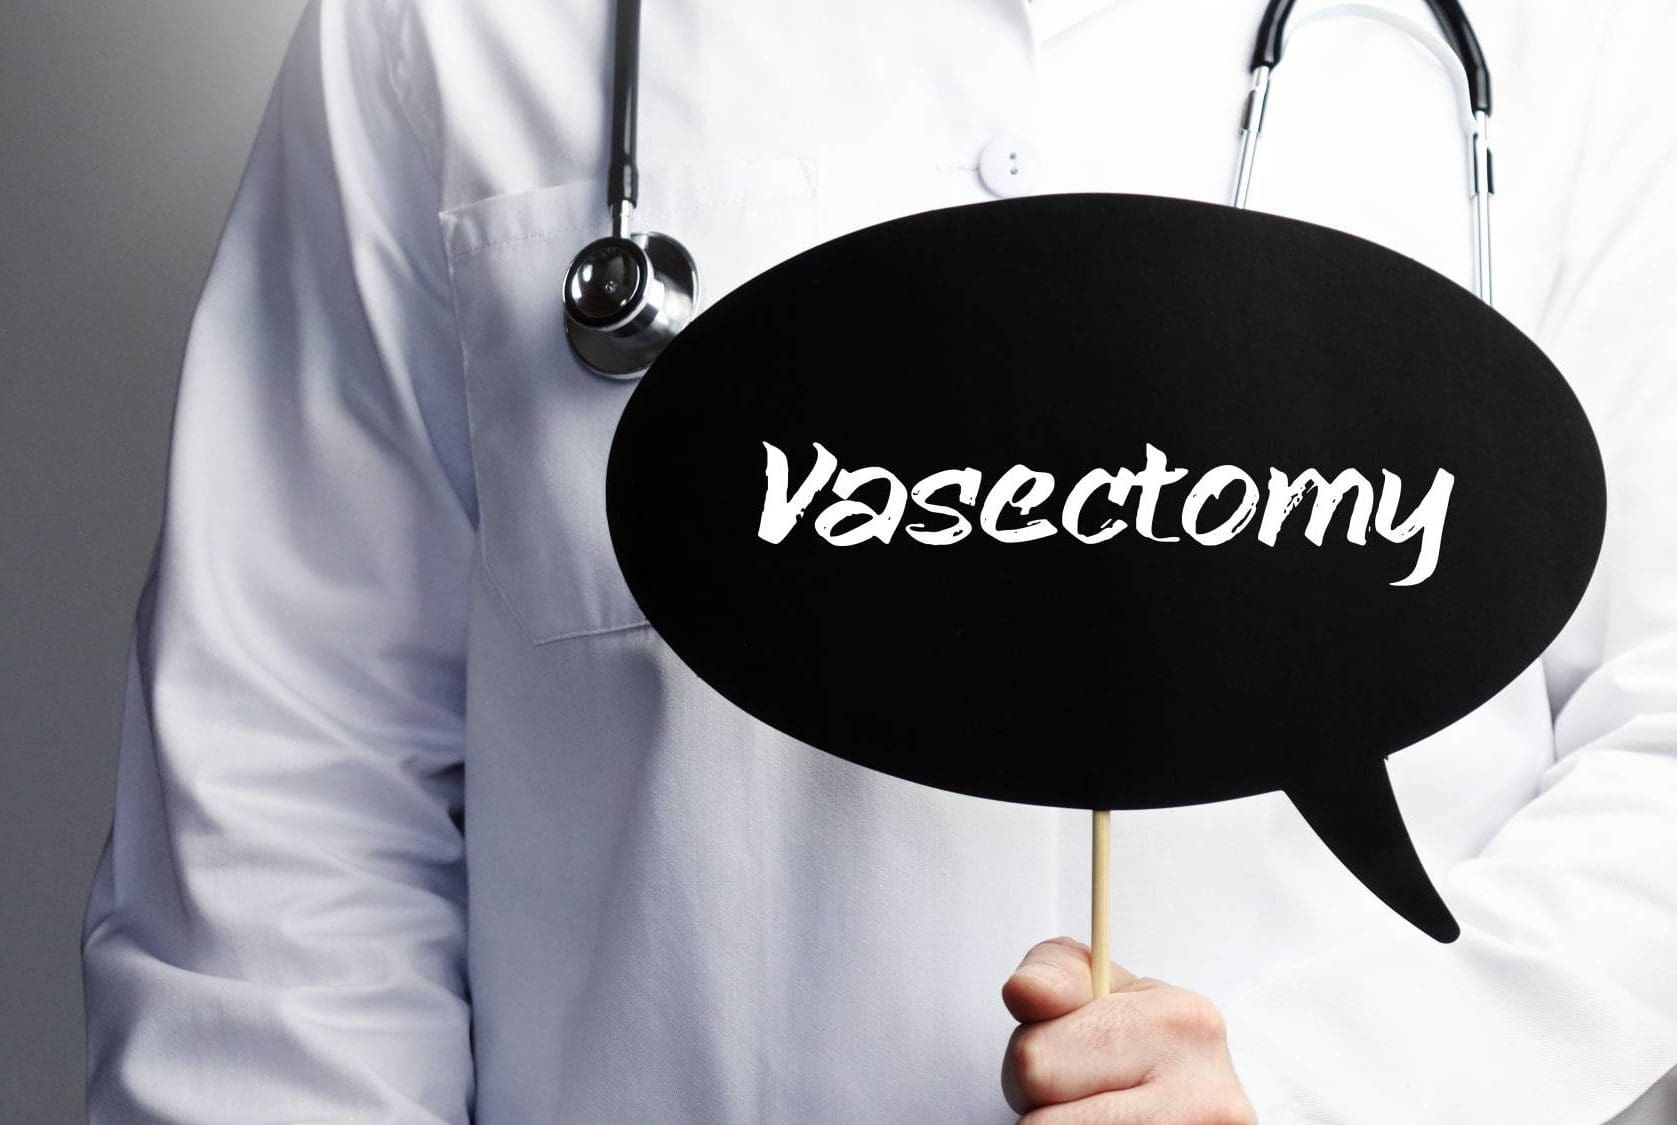 Vasectomy: frequently asked questions